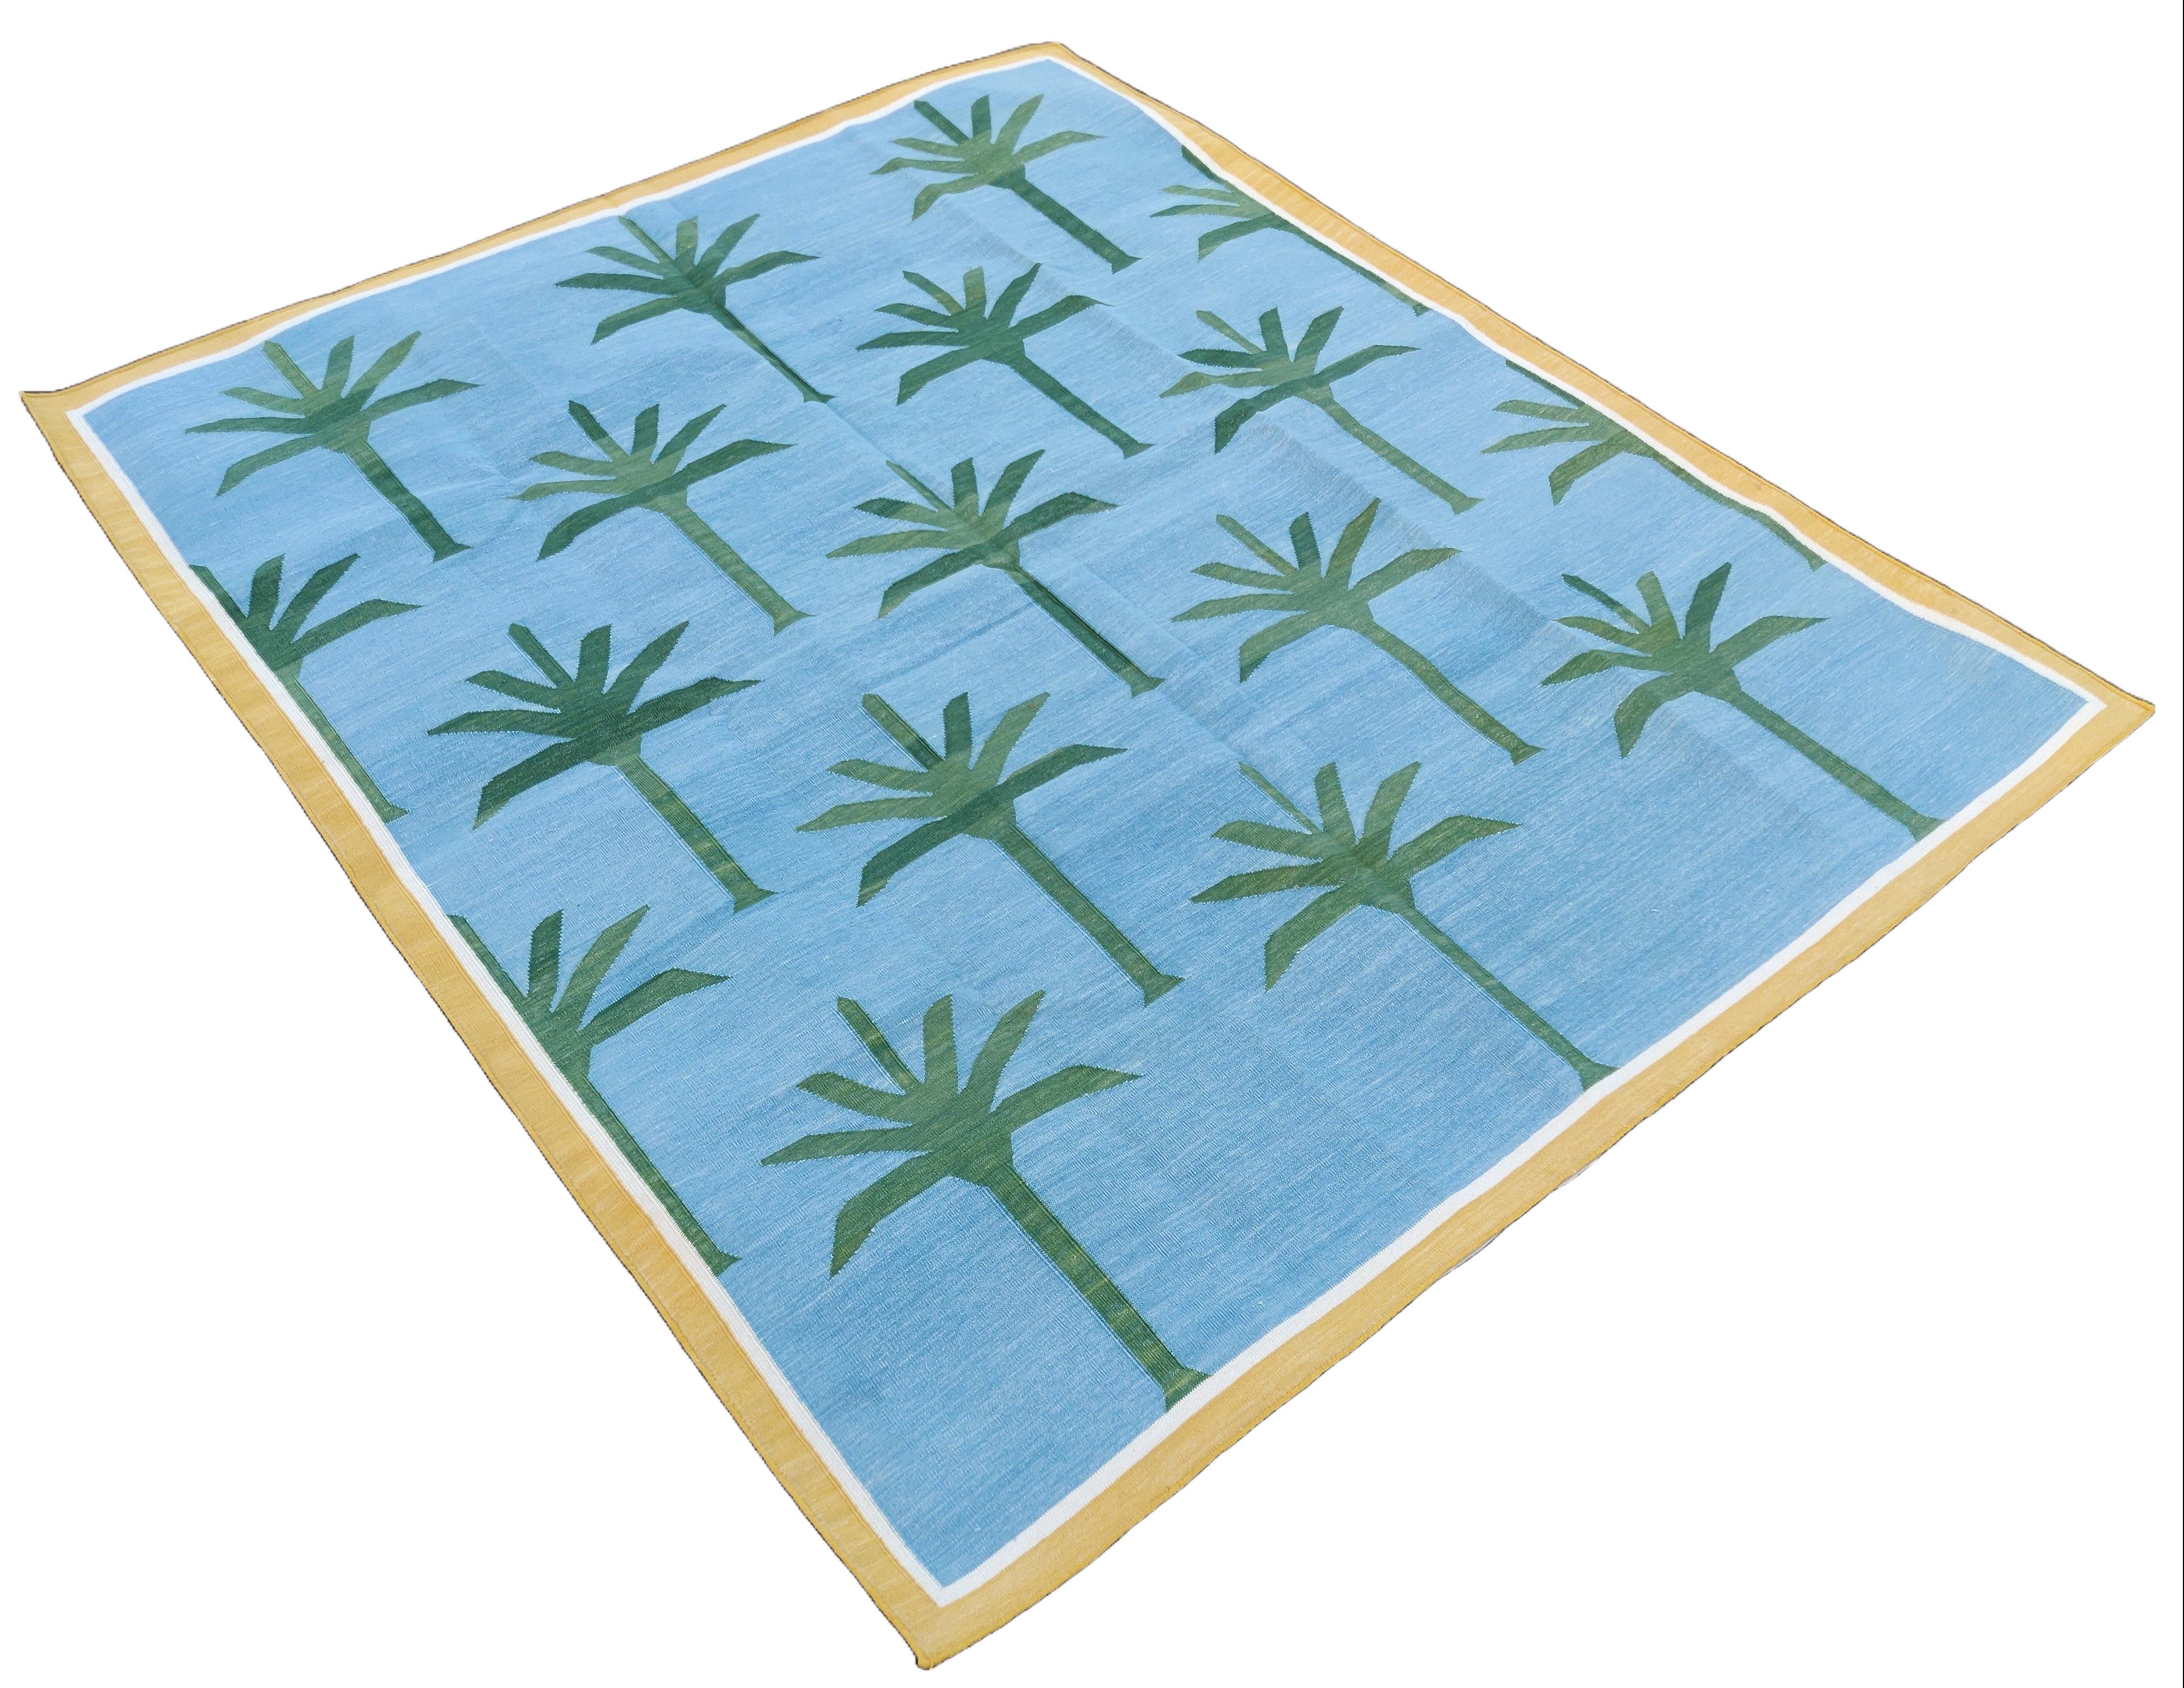 Cotton Vegetable Dyed Sky Blue, Forest Green And Yellow Palm Tree Pattern Indian Dhurrie Rug-5'x7' 
These special flat-weave dhurries are hand-woven with 15 ply 100% cotton yarn. Due to the special manufacturing techniques used to create our rugs,